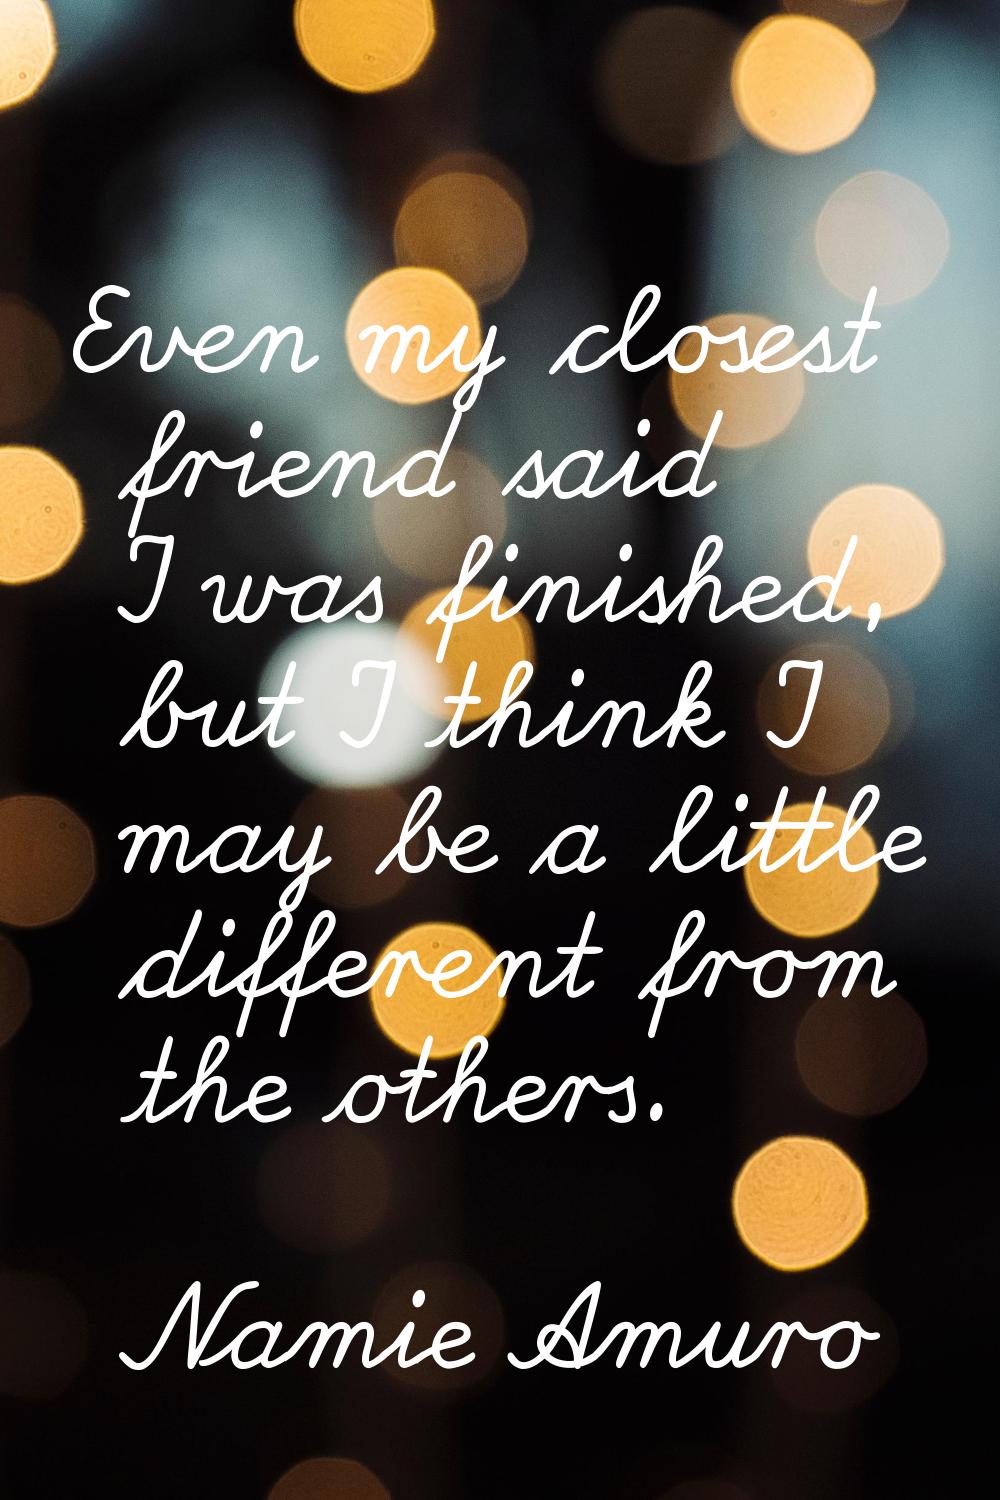 Even my closest friend said I was finished, but I think I may be a little different from the others